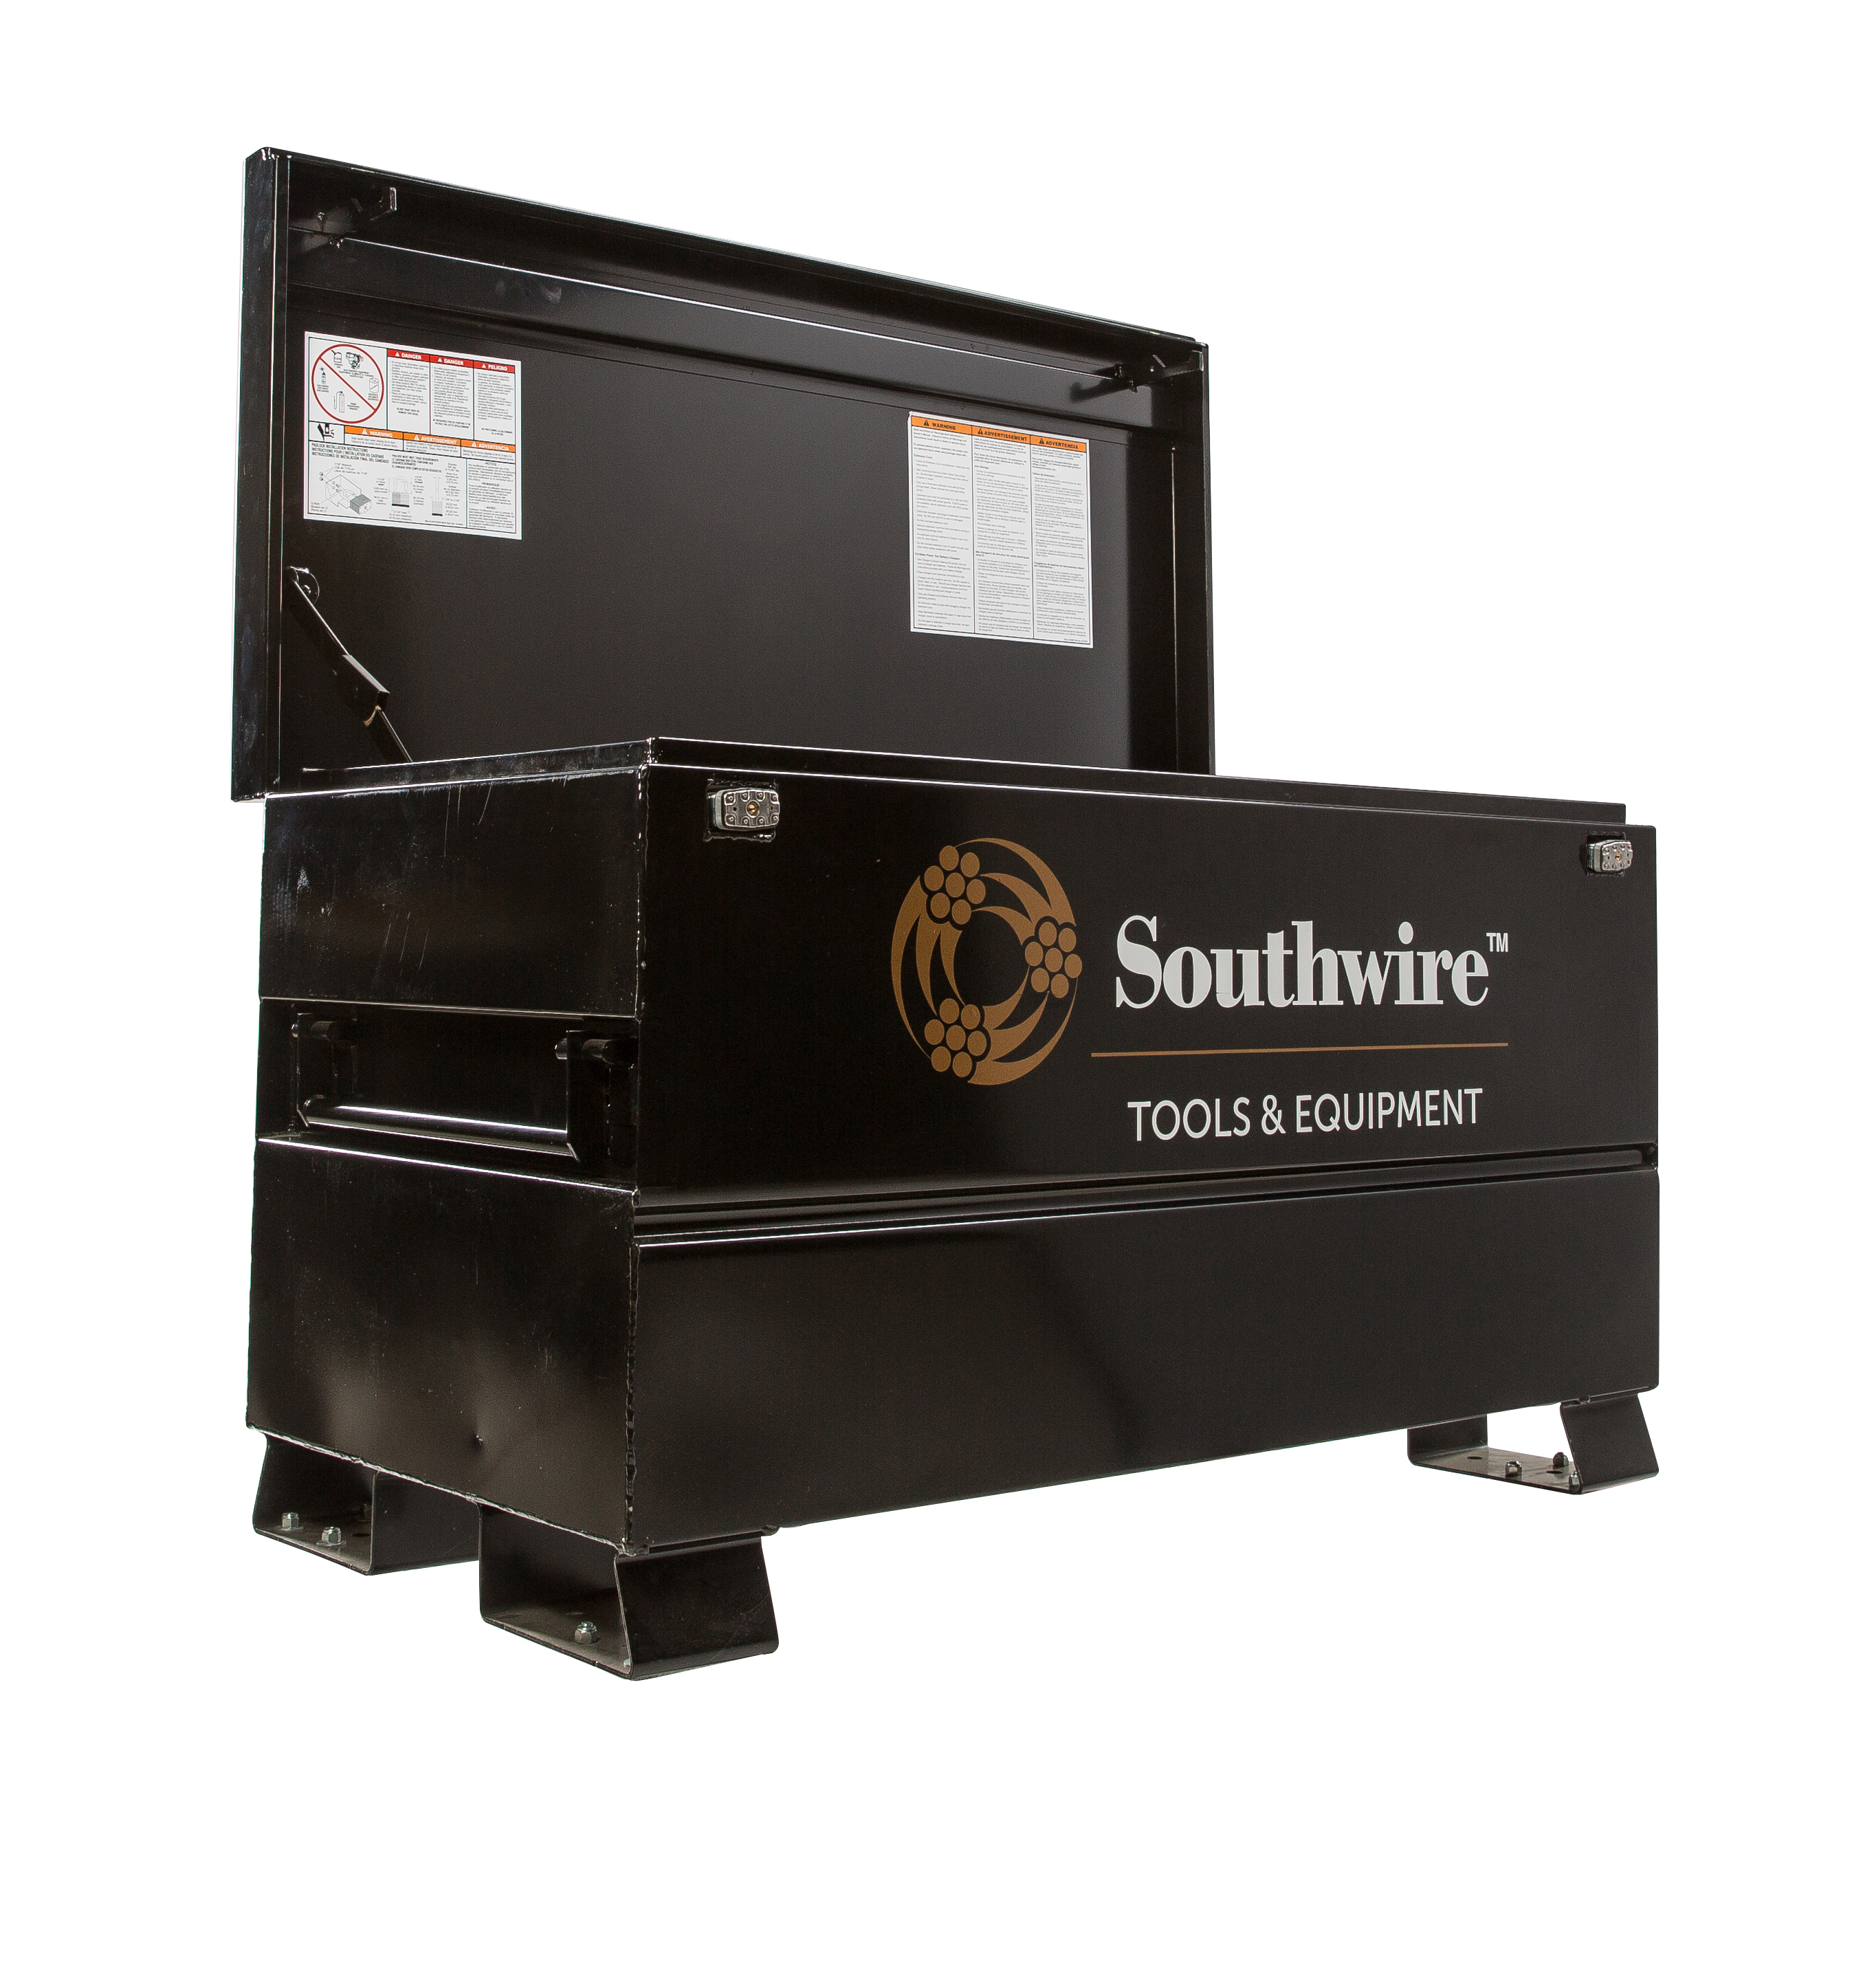 Southwire's compact chest is a highly mobile storage vault. This box offers the prefect profile for any truck bed and will be a staple to your material storage needs. With the addition of steel fork lift skids, this box will become your workhorse. With the Southwire Compact Chest, there is no better way to control and secure your livelihood.